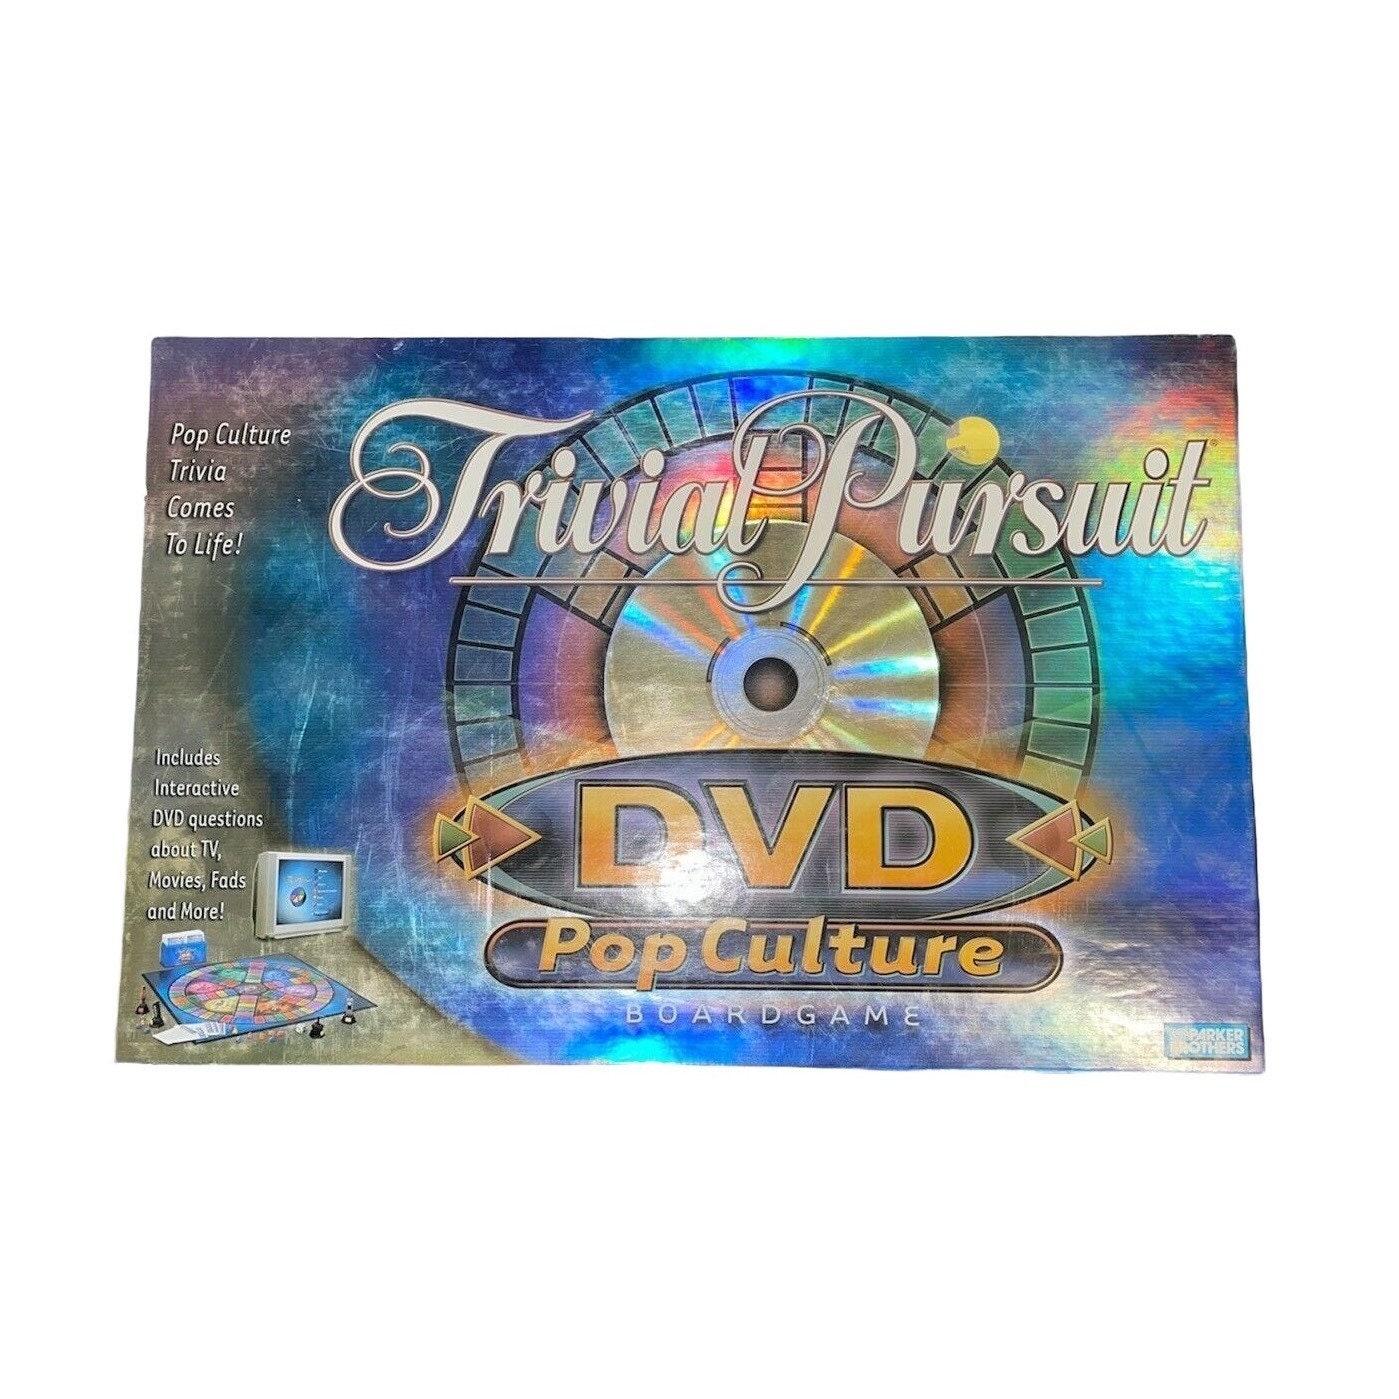 Geheugen officieel kwaad Trivial Pursuit DVD Pop Culture New SEALED Board Game Family - Etsy